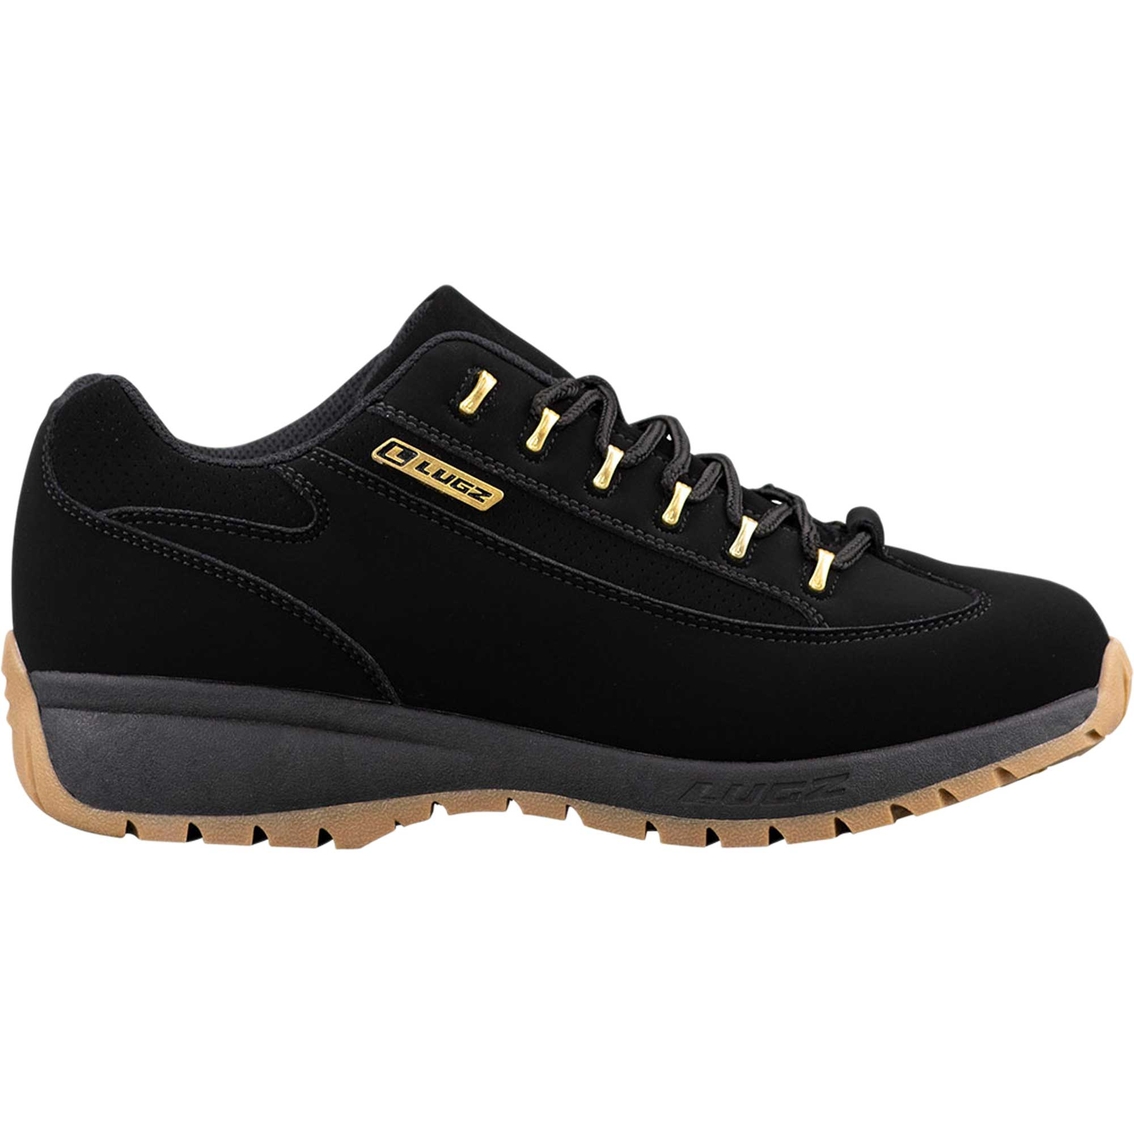 Lugz Men's Express Sneakers - Image 2 of 7